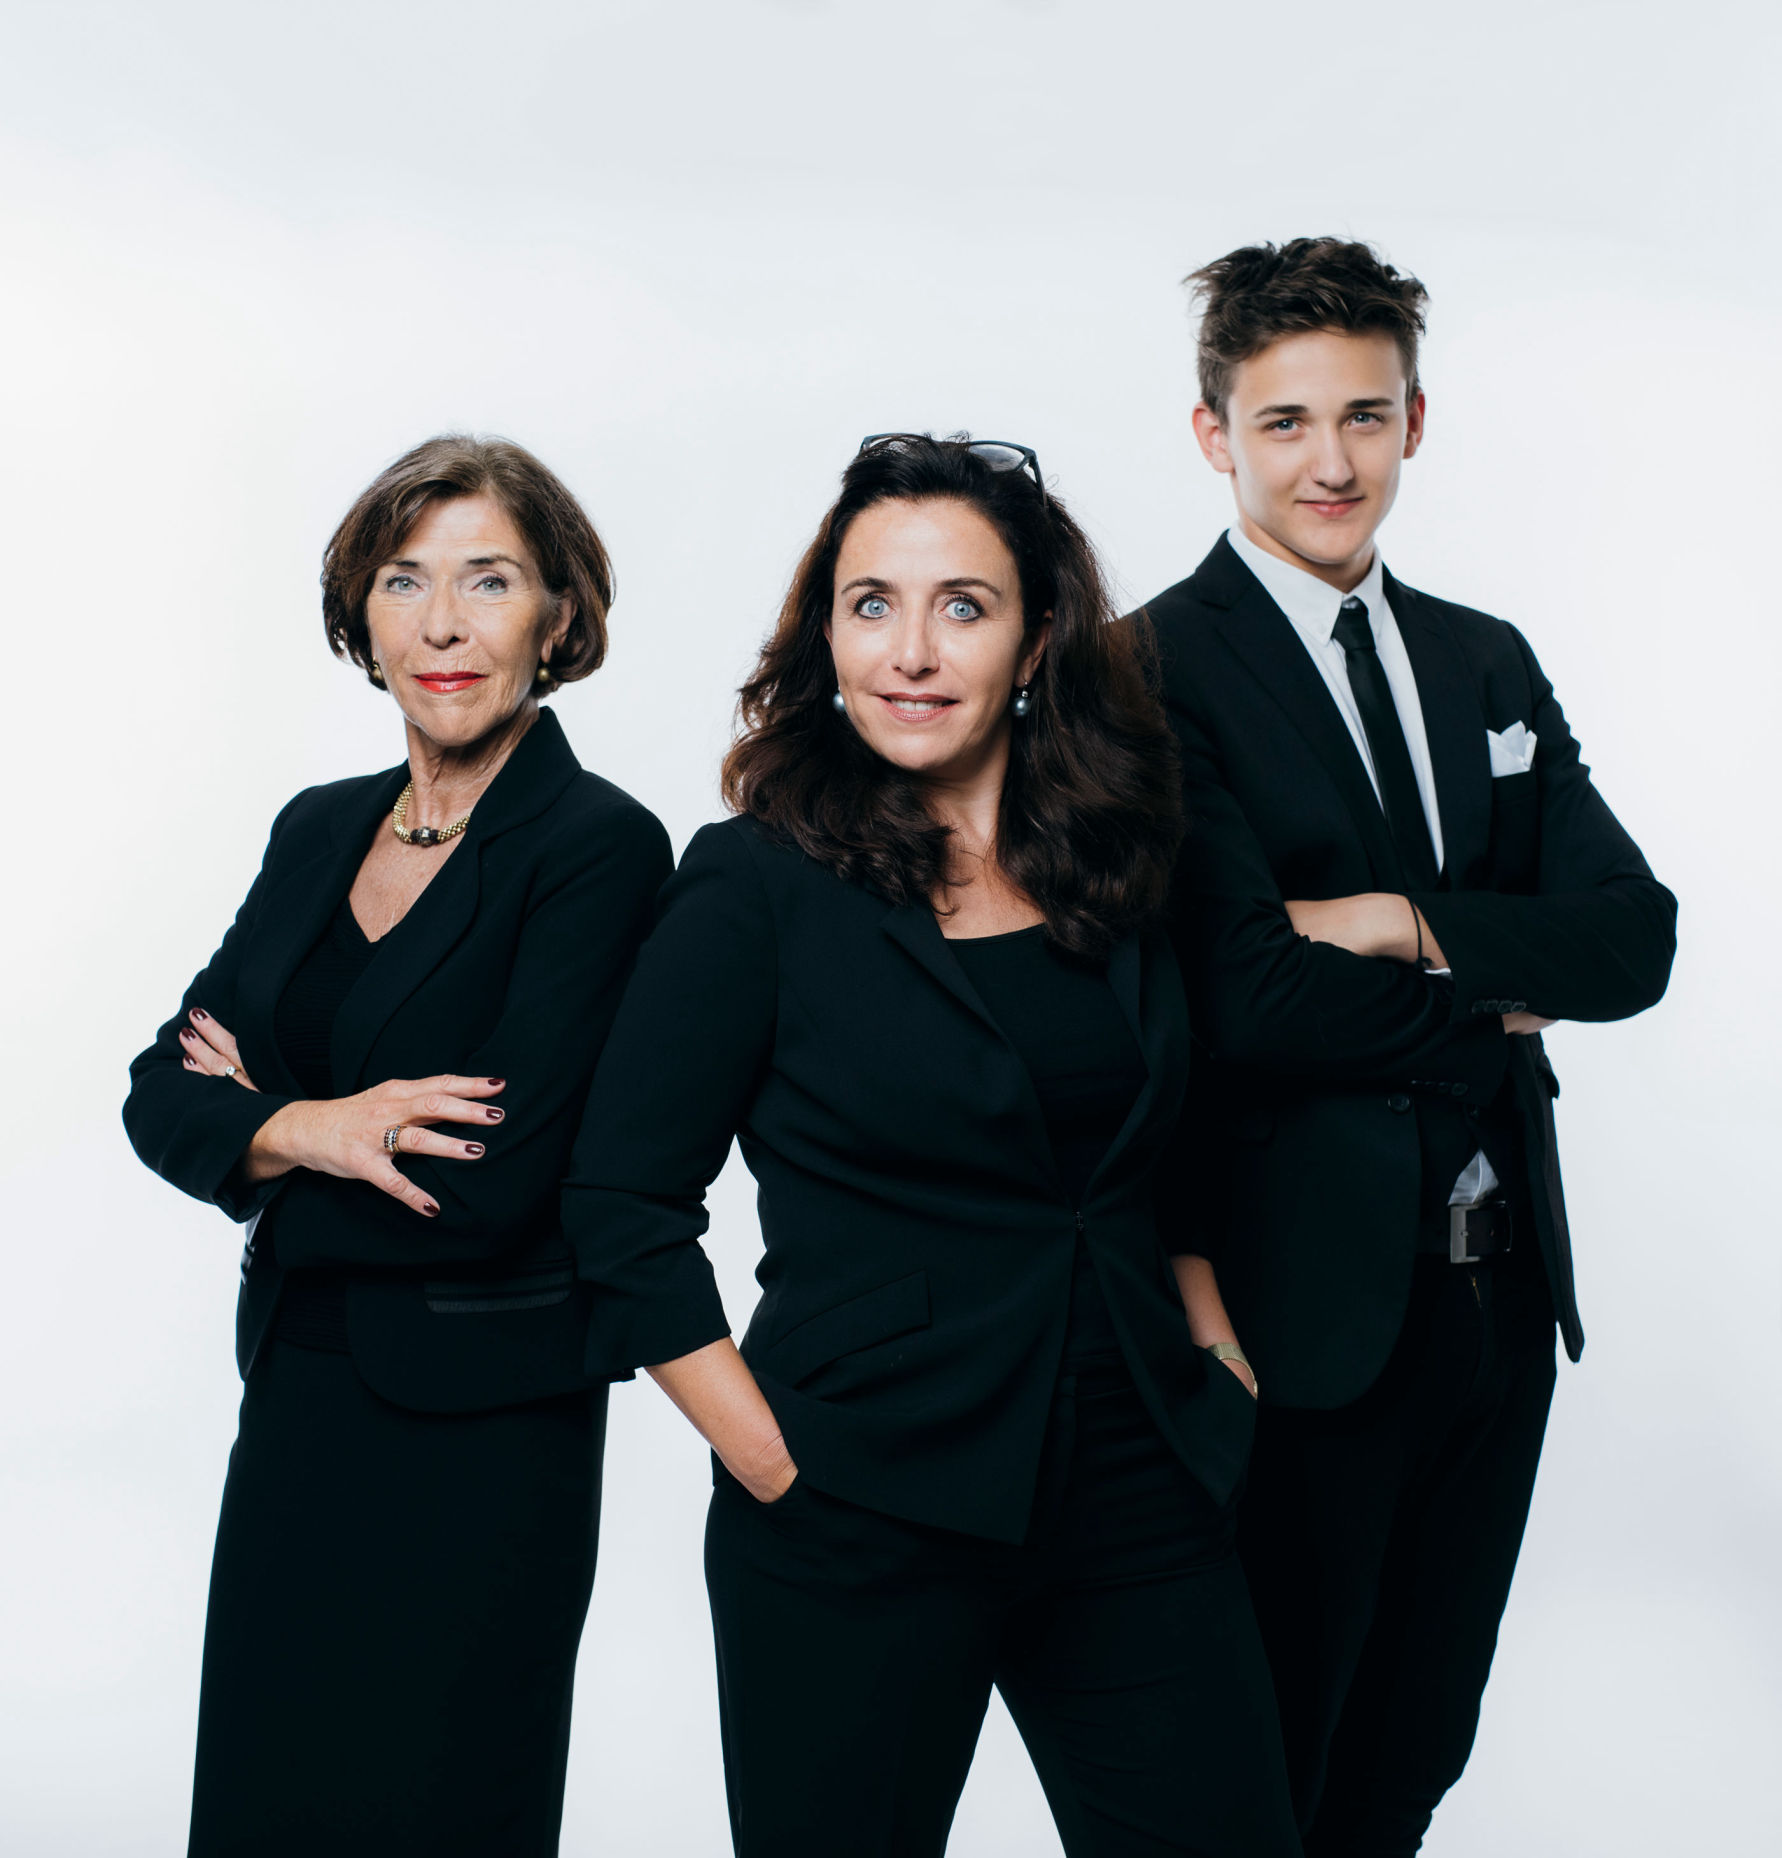 Gaube family business: founder Elisabeth Gaube, managing director Martina Silly-Gaube and young talent Martin Silly